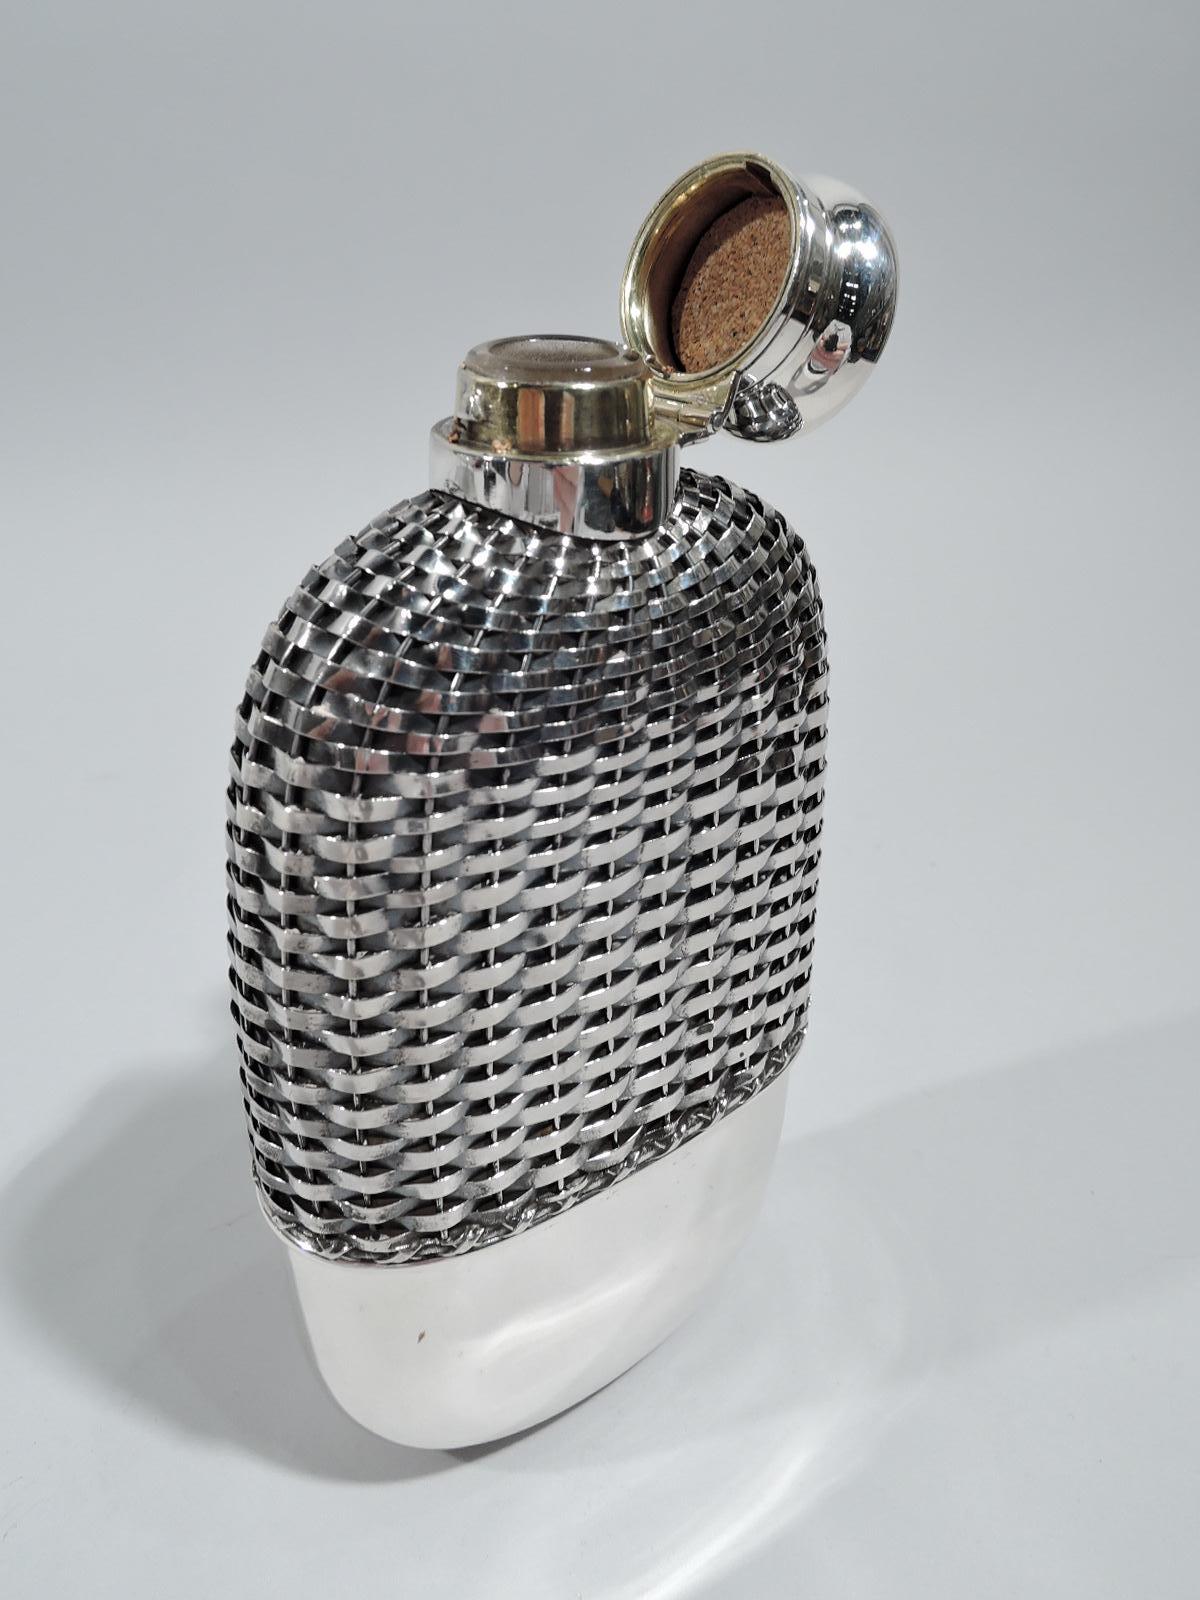 Edwardian flask. Made by Gorham in Providence, ca 1910. Clear glass body with detachable sterling silver cup at bottom. Top covered in sterling silver weave. Short neck in sterling silver collar with hinged and cork-lined bayonet cover. Perfect for